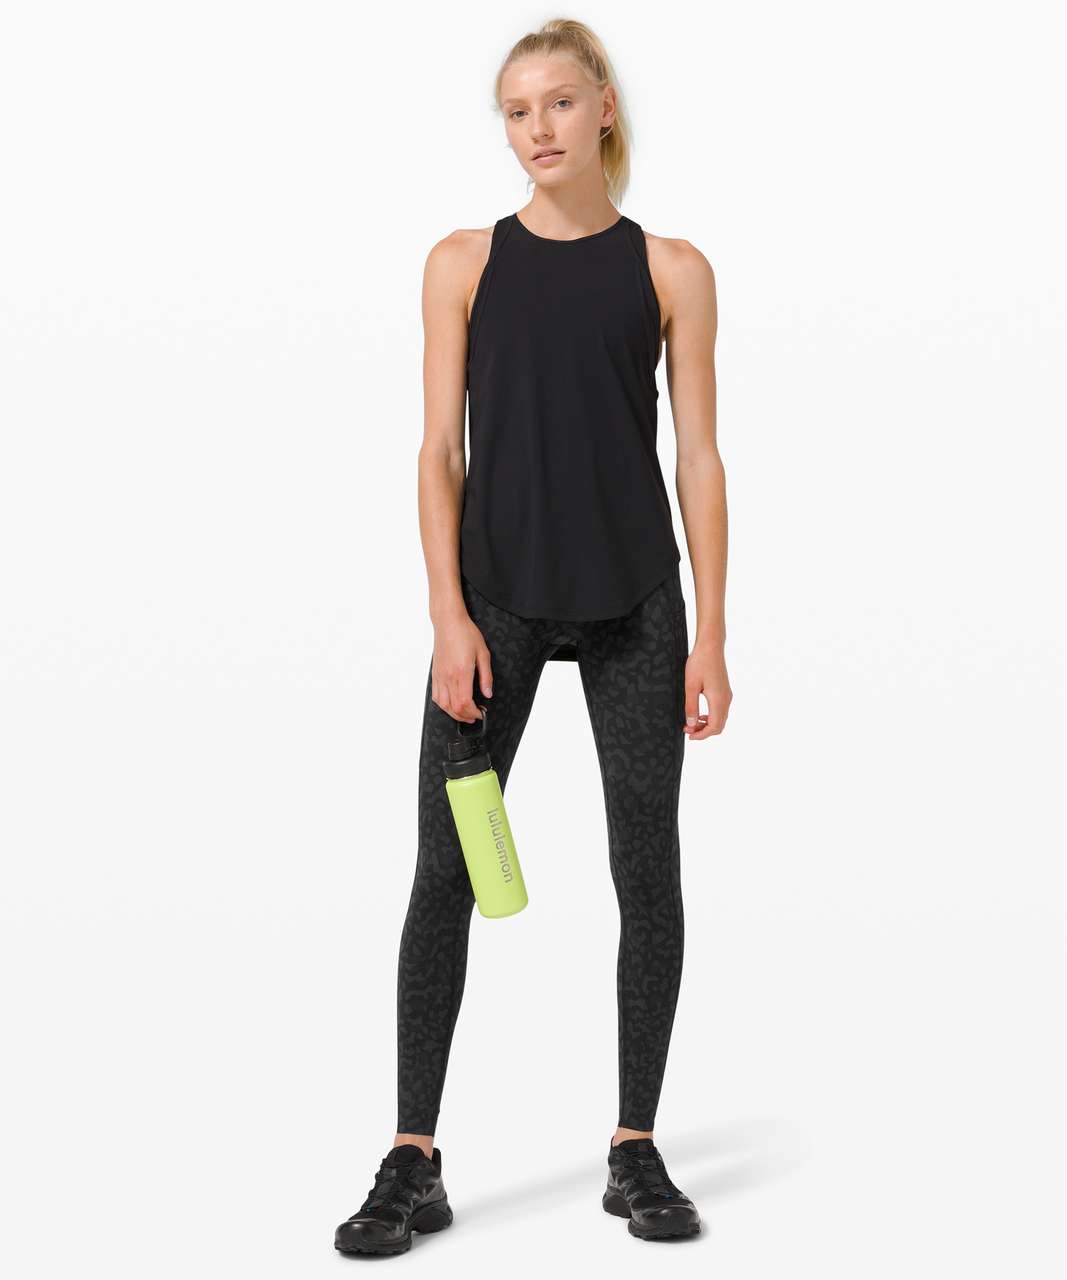 Lululemon Fast and Free Tight 28" *Non-Reflective - Formation Camo Deep Coal Multi